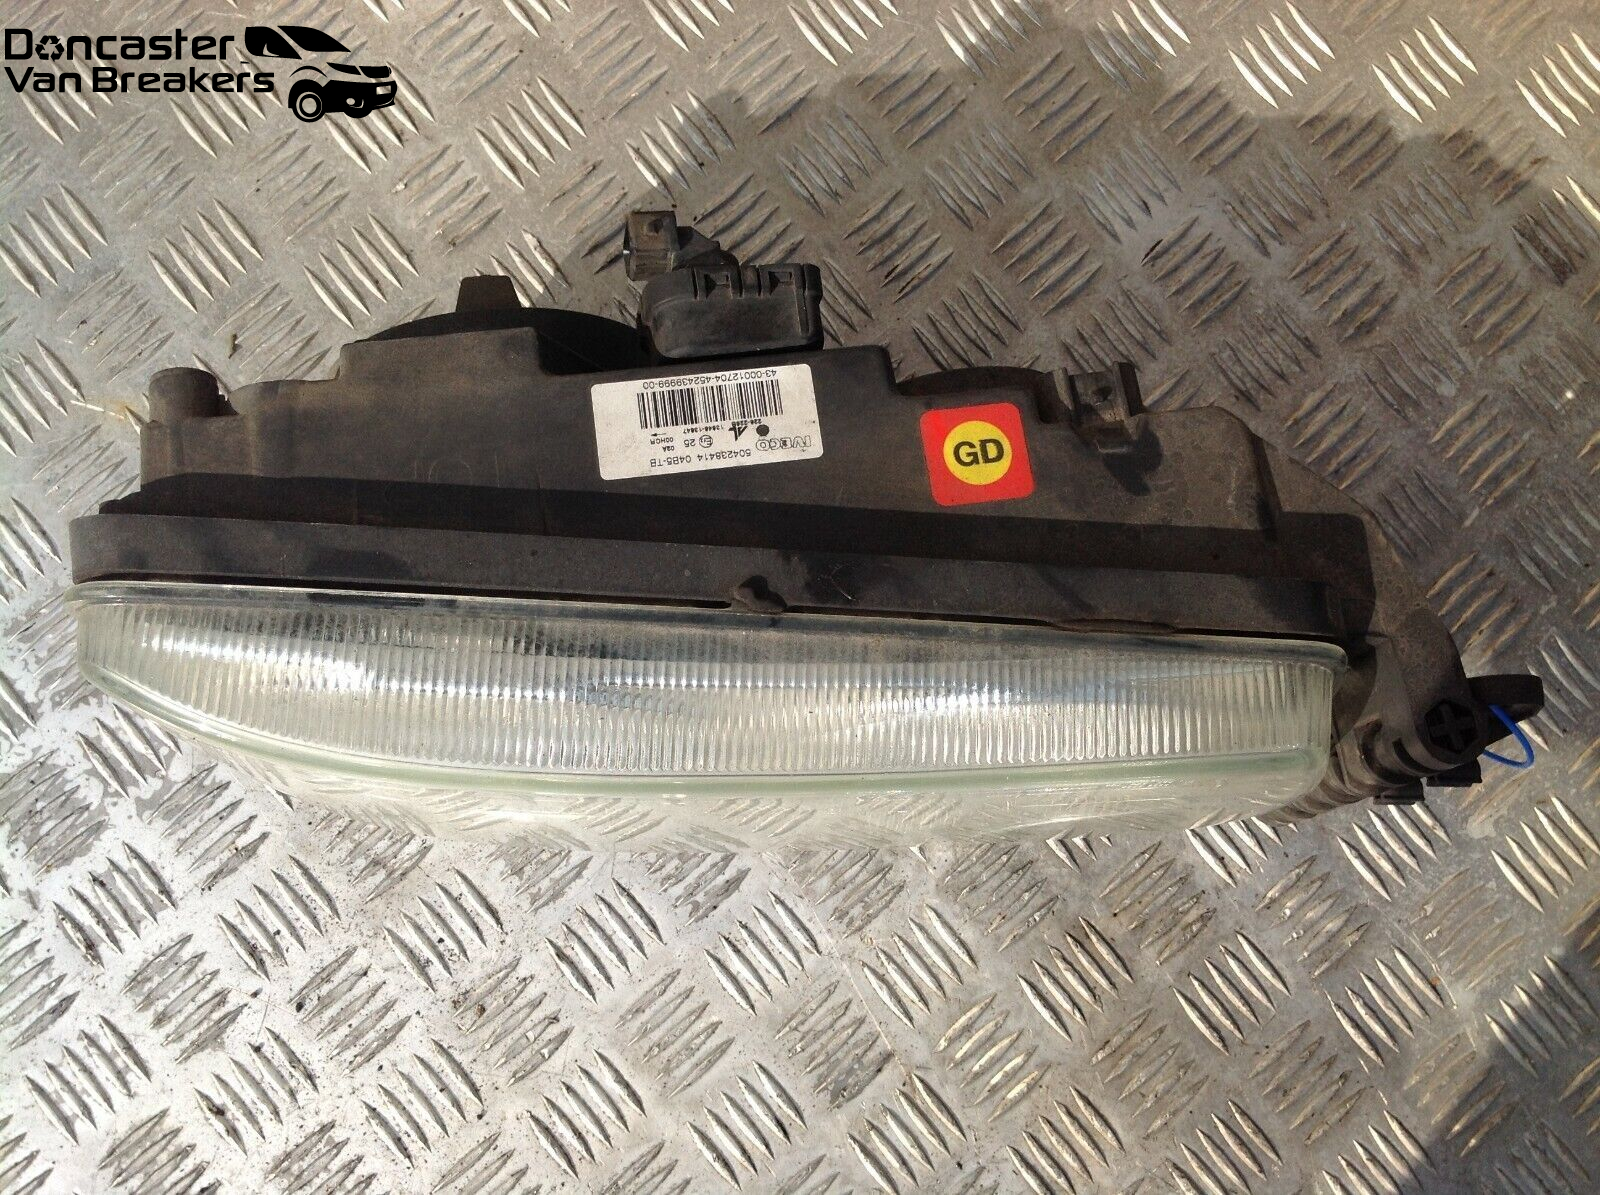 IVECO EUROCARGOL HEADLIGHT O/S DRIVERS SIDE / RIGHT HAND SIDE 504238414